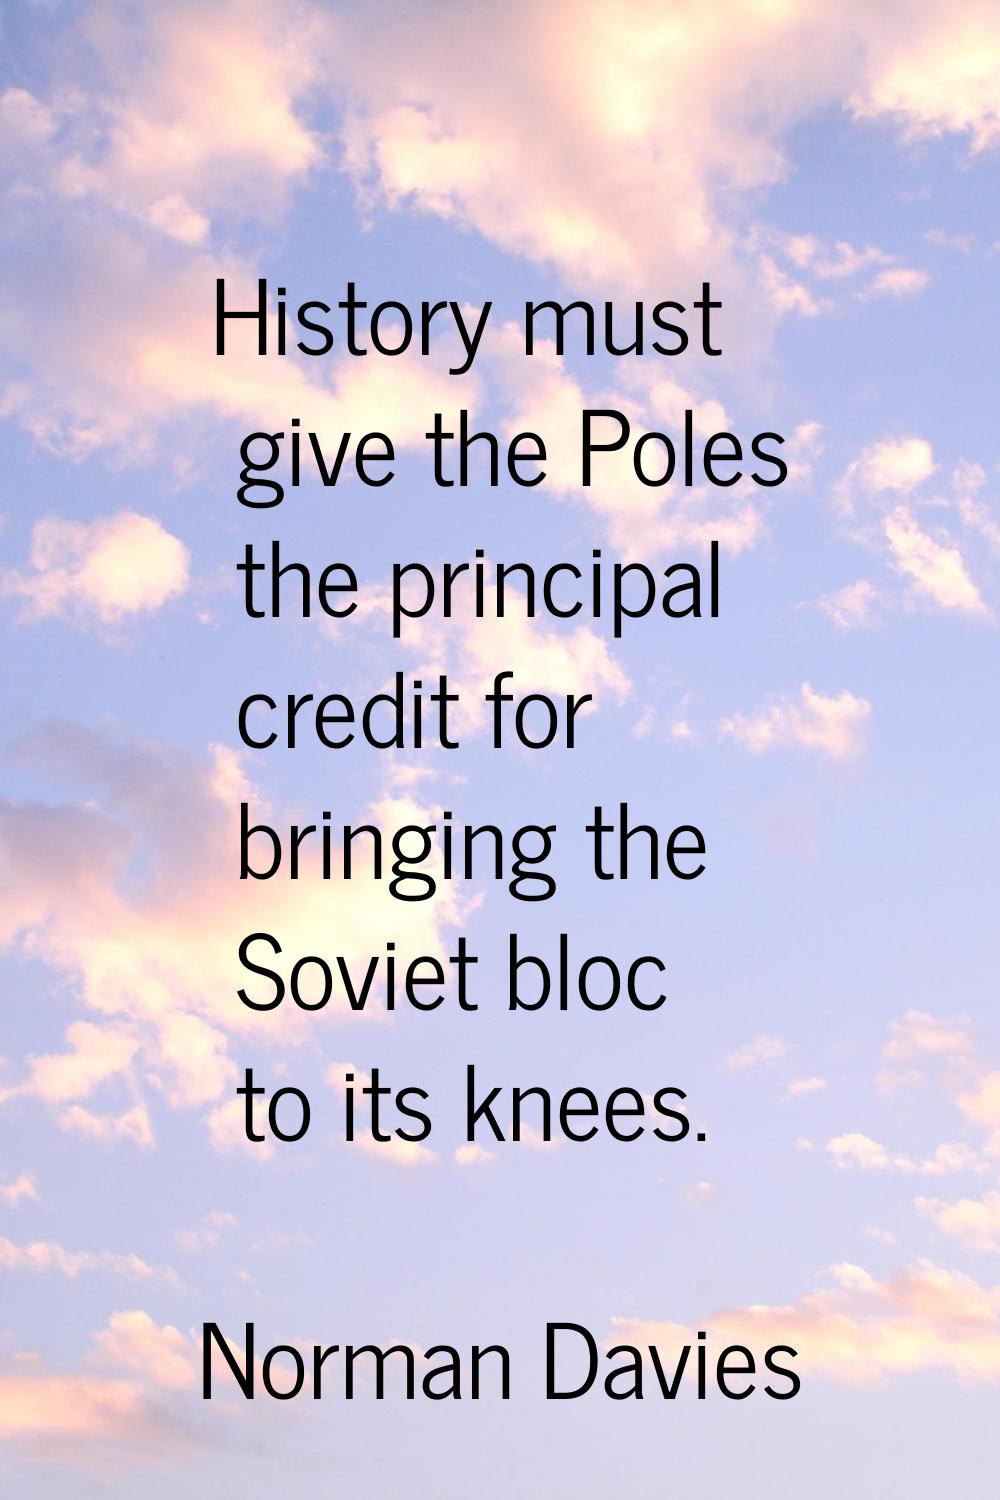 History must give the Poles the principal credit for bringing the Soviet bloc to its knees.